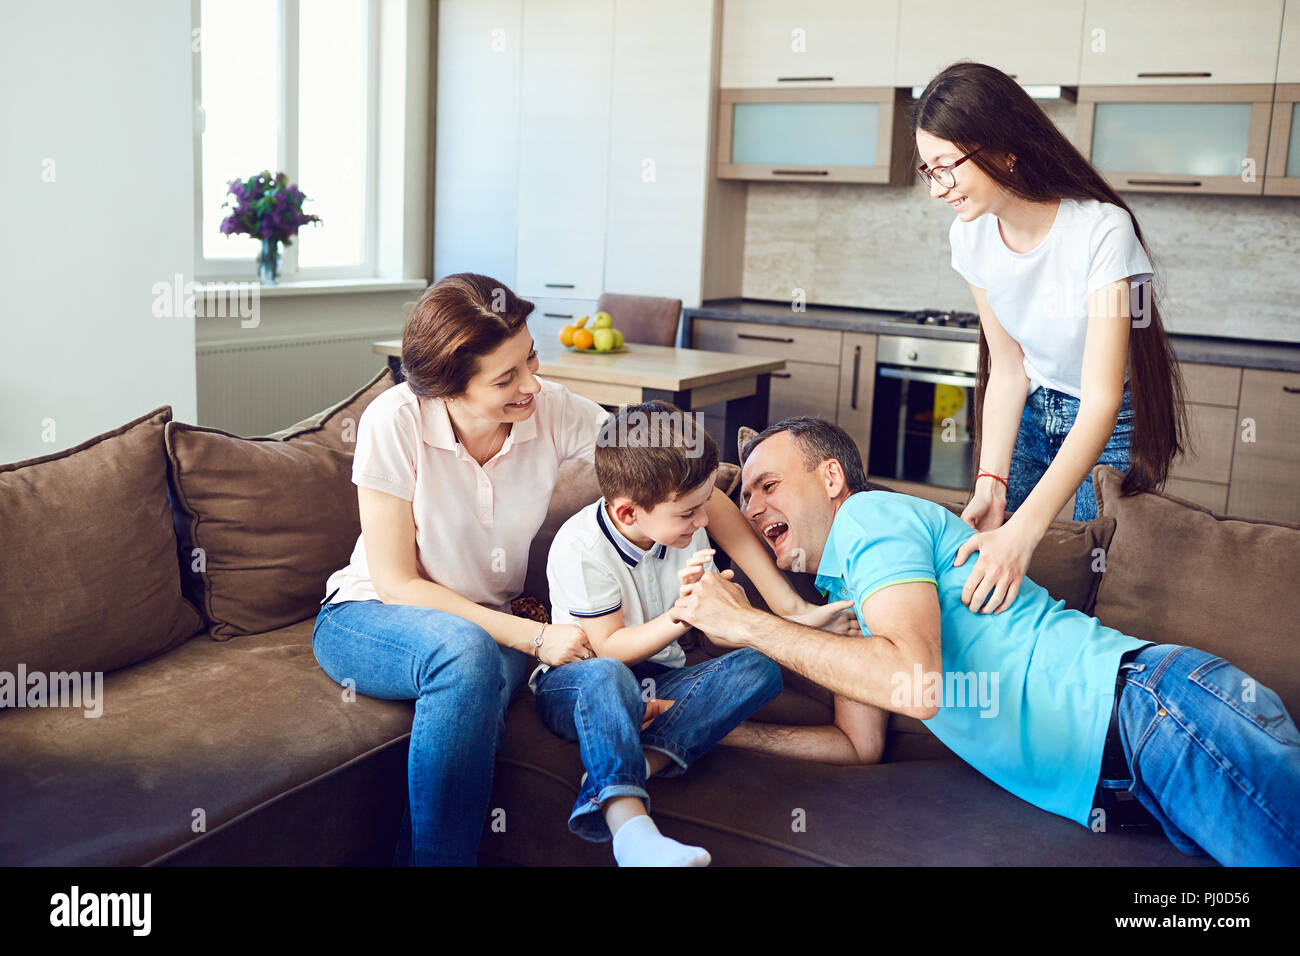 The family plays together fun on the couch. Stock Photo